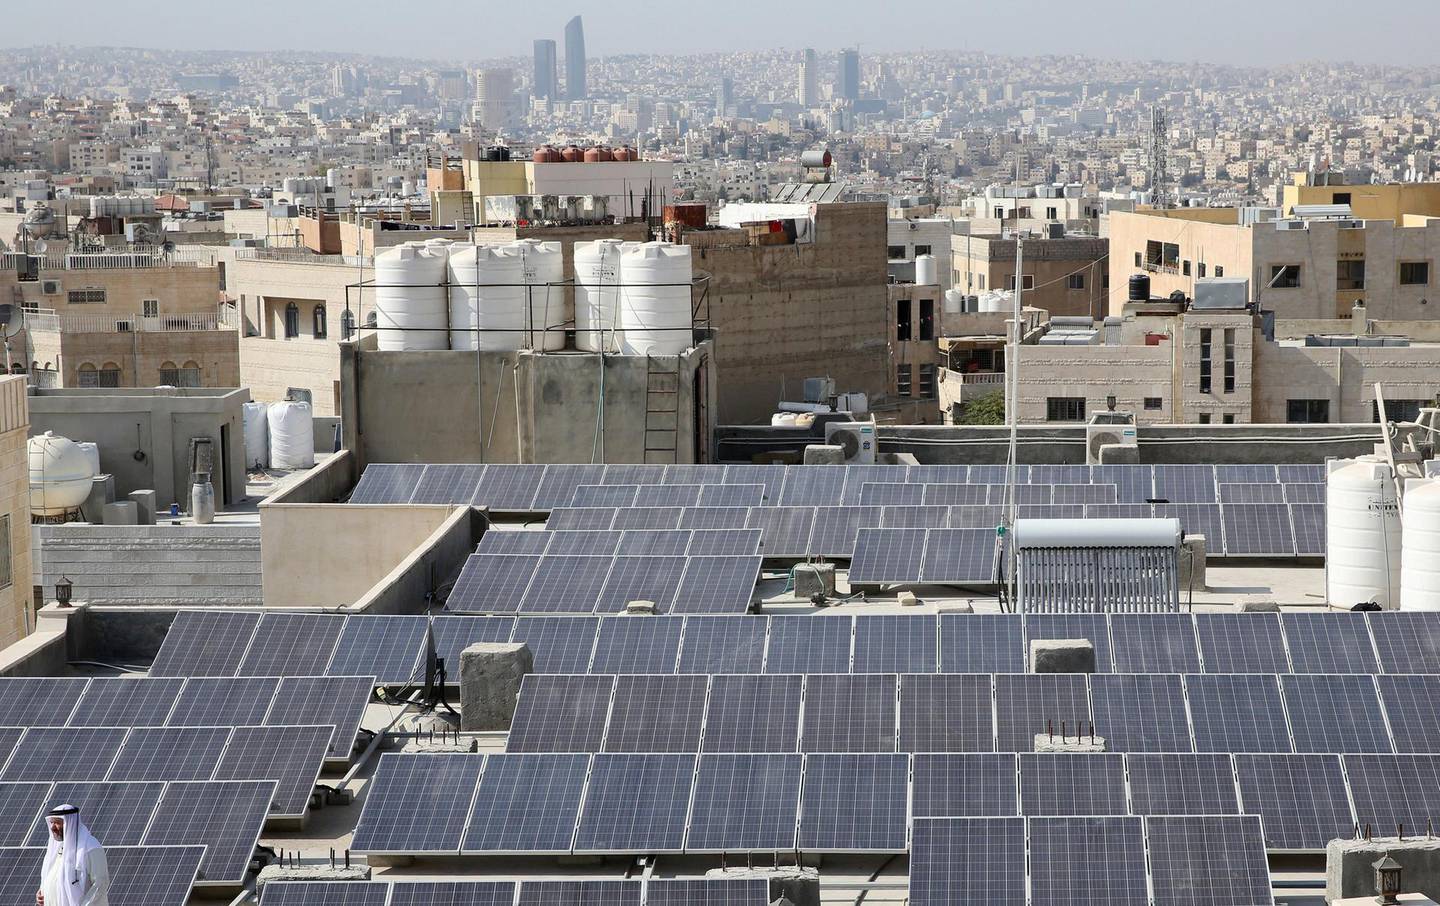 A picture shows on September 6, 2018 a view of the Hamdan al-Qara mosque in southern Amman, equiped with 140 solar panels on its roof. - Jordan imports nearly 98 percent of its energy supply, and has long relied on gas, heavy fuel oil and diesel to run its power plants. But a government plan to make clean energy 20 percent of the kingdom's overall power consumption by 2020 has seen alternative energy projects skyrocket in recent years. (Photo by Khalil MAZRAAWI / AFP)